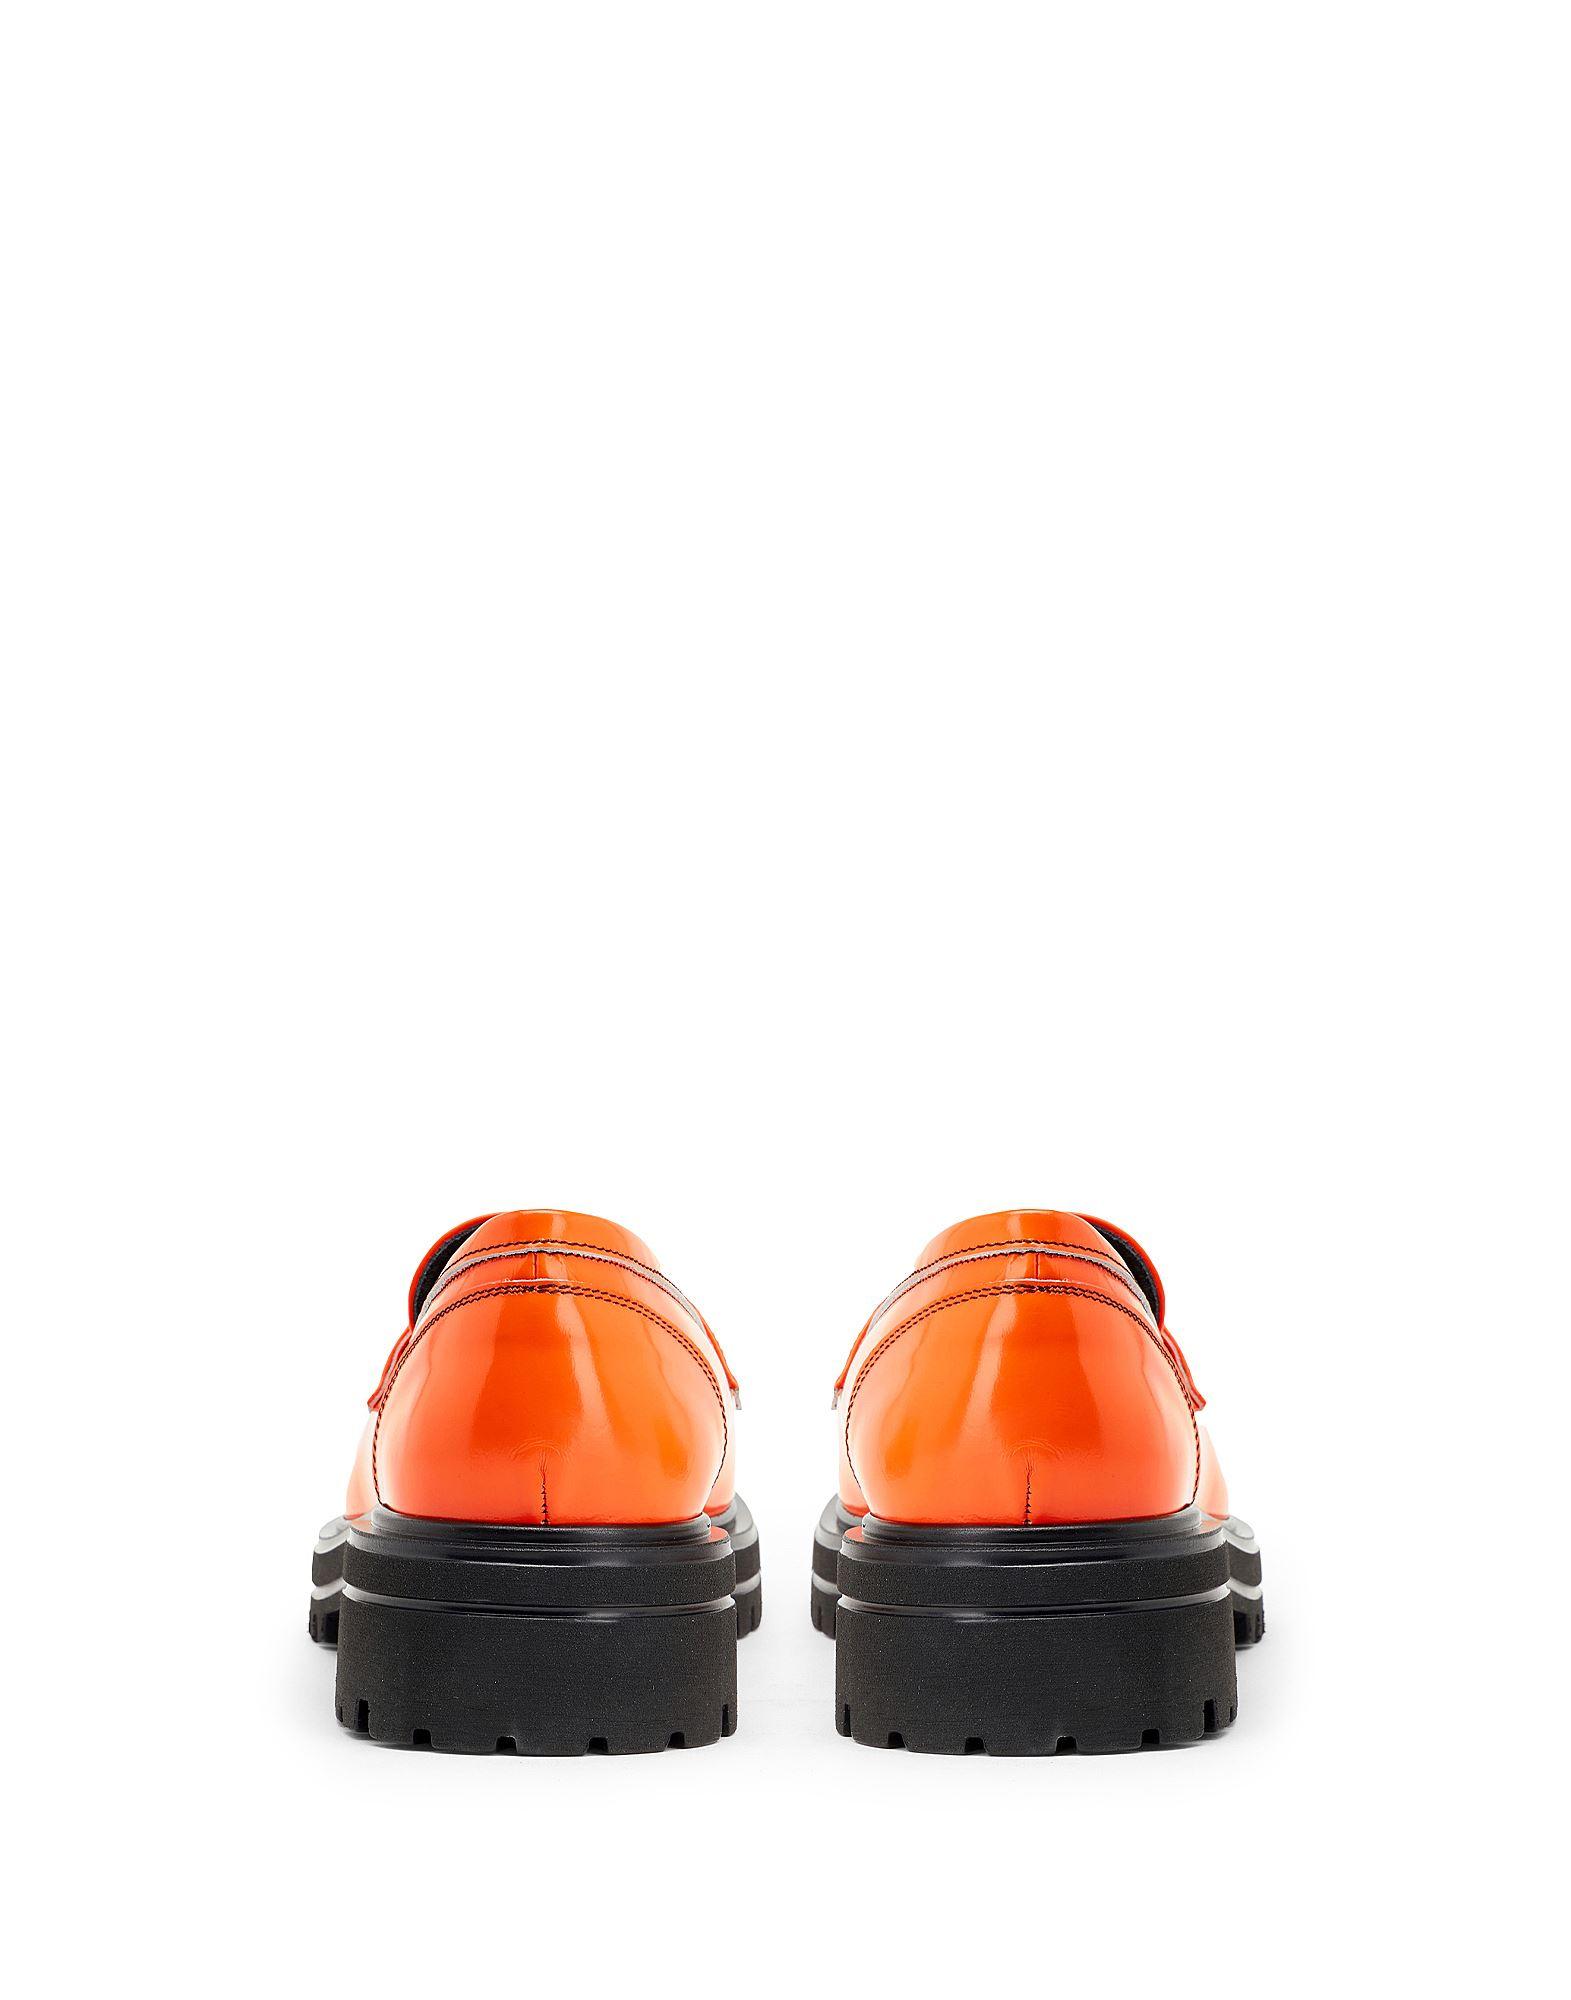 8 by YOOX Loafer in Orange for Men | Lyst